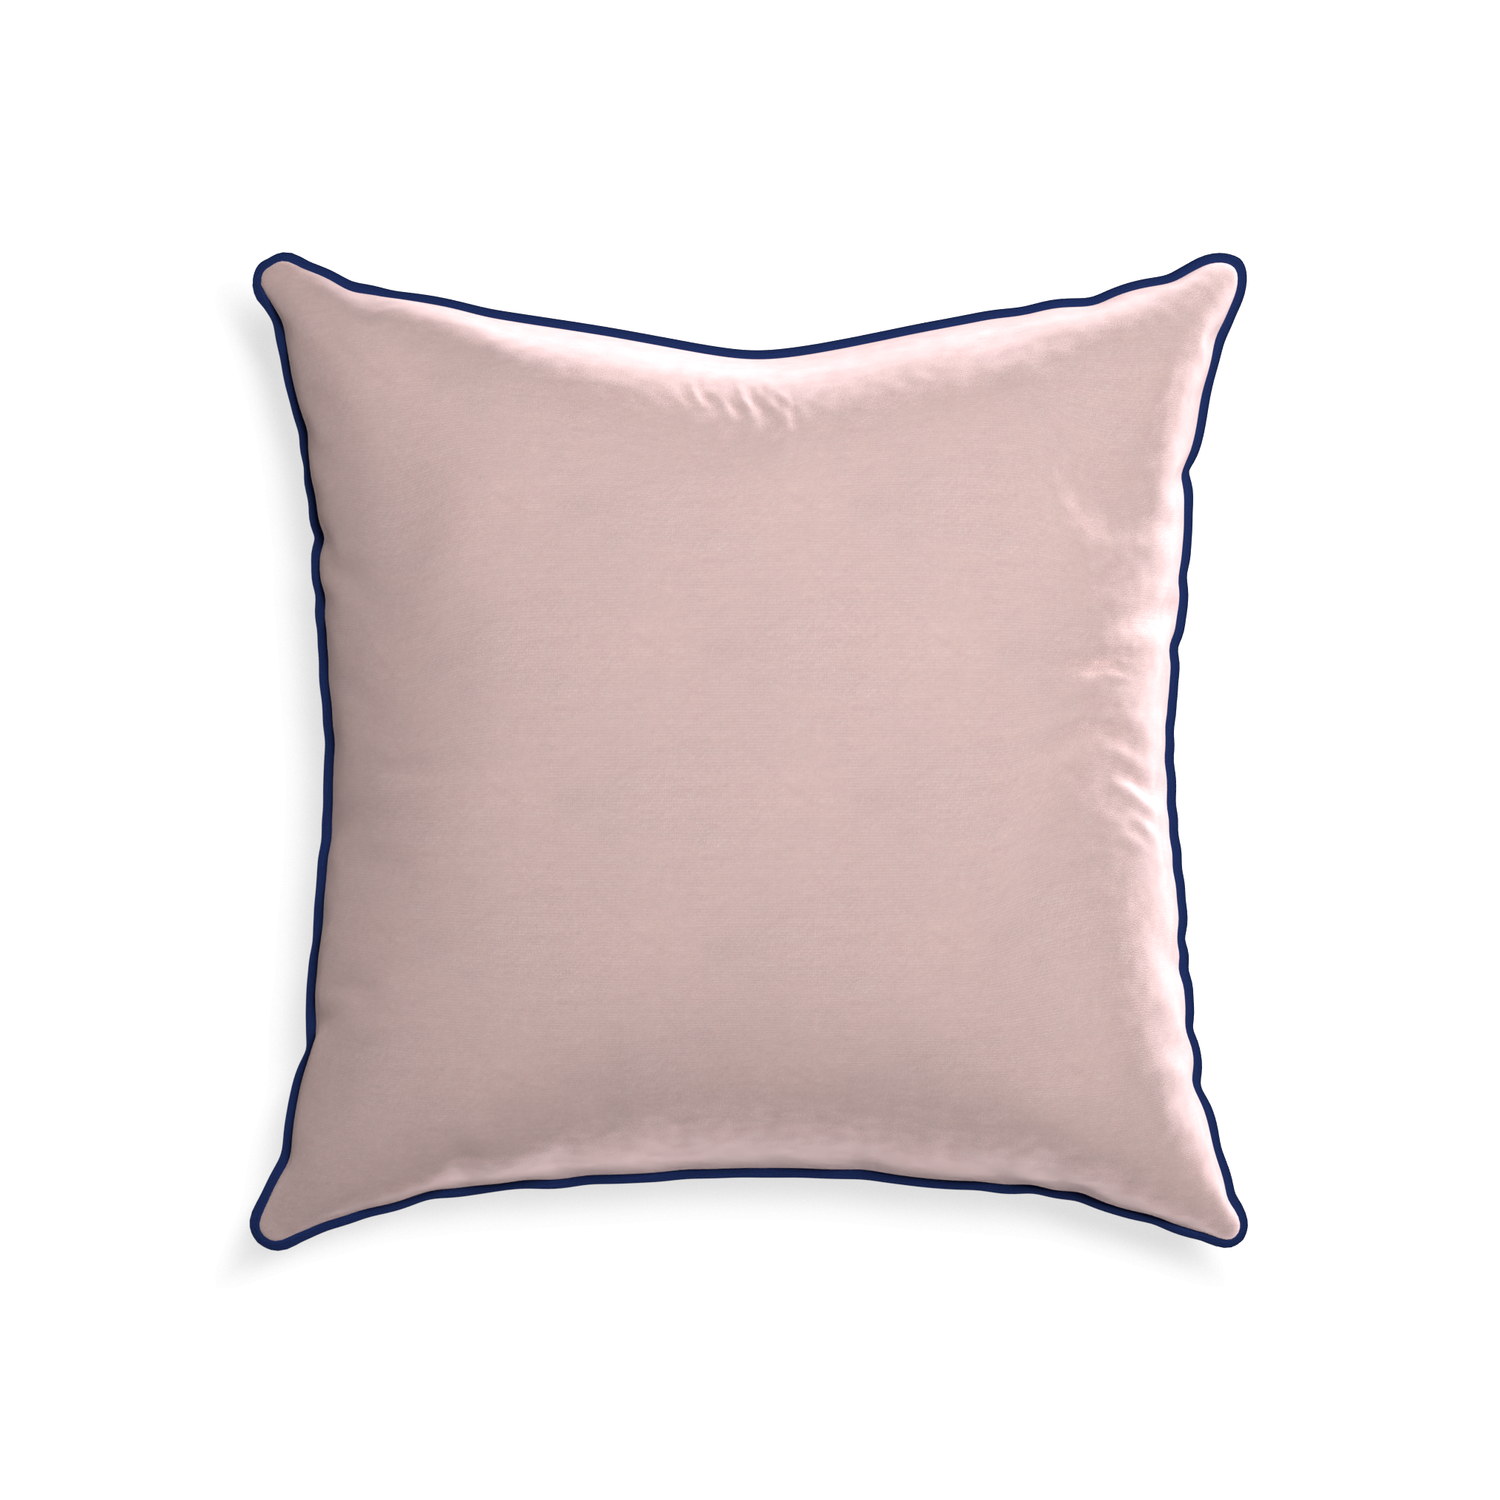 22-square rose velvet custom pillow with midnight piping on white background